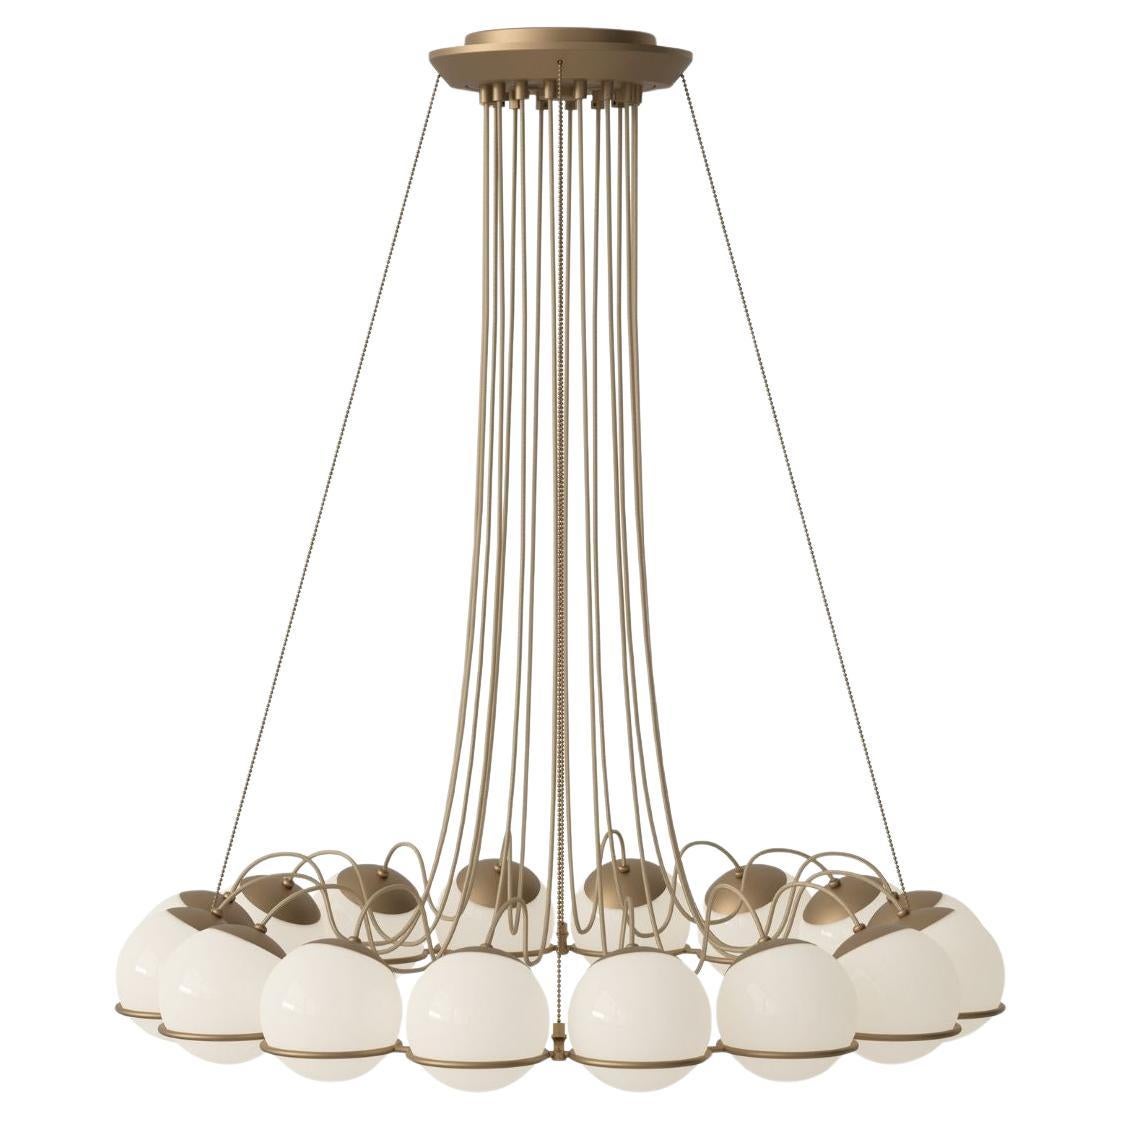 Gino Sarfatti Model 2109/16/20 Opaline Glass Chandelier in Champagne for Astep For Sale